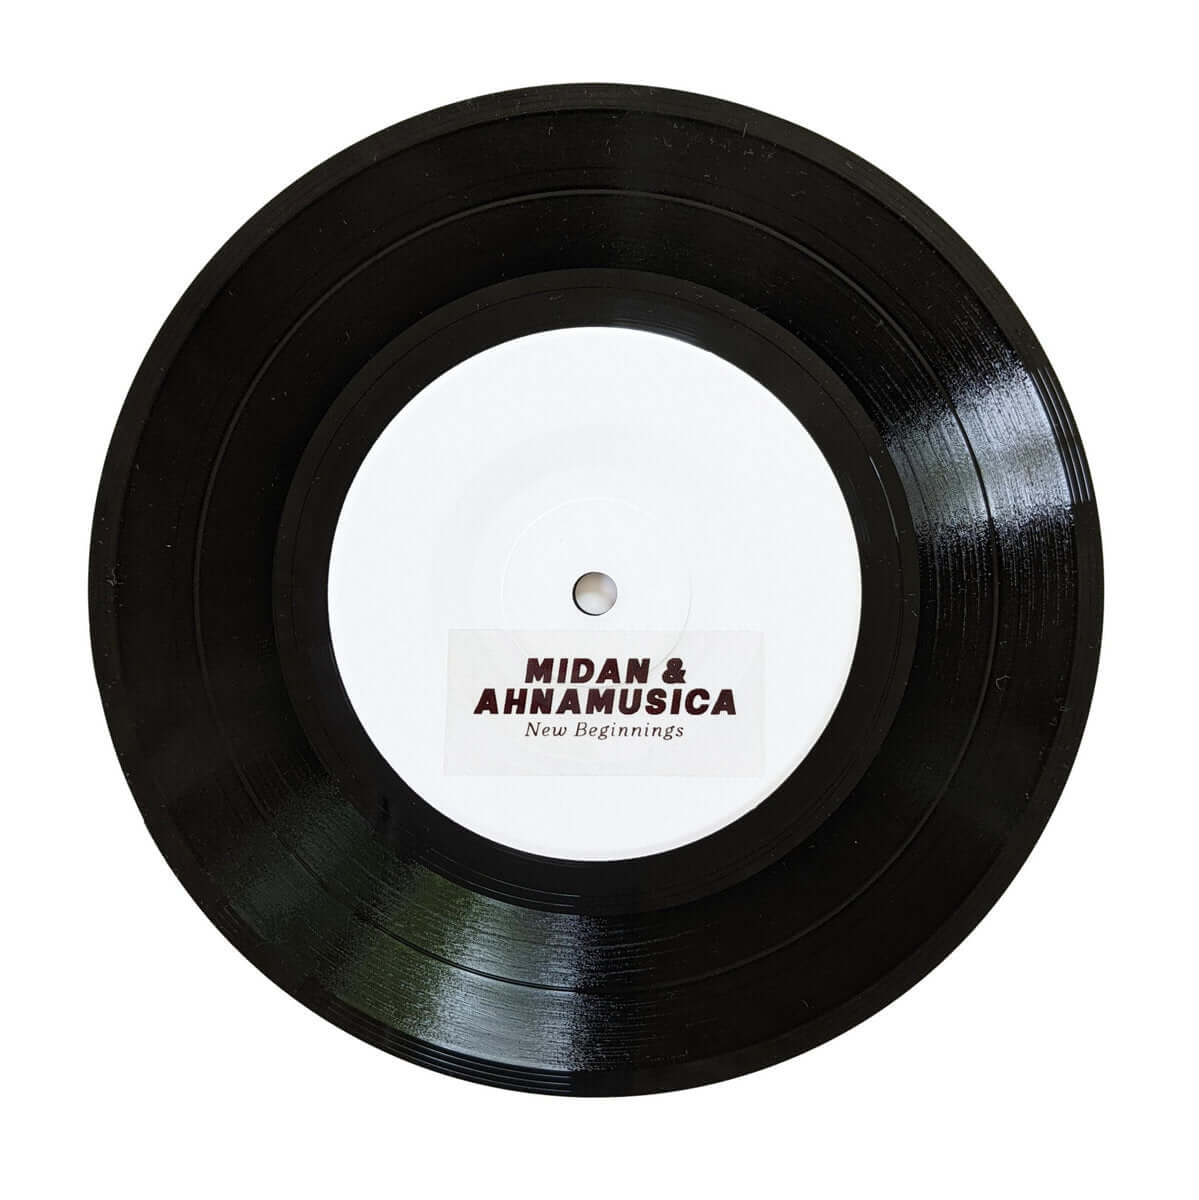 Midan & AHNAMUSICA - New Beginnings - Limited Edition 7 Inch Vinyl Test Pressing - Cold Busted